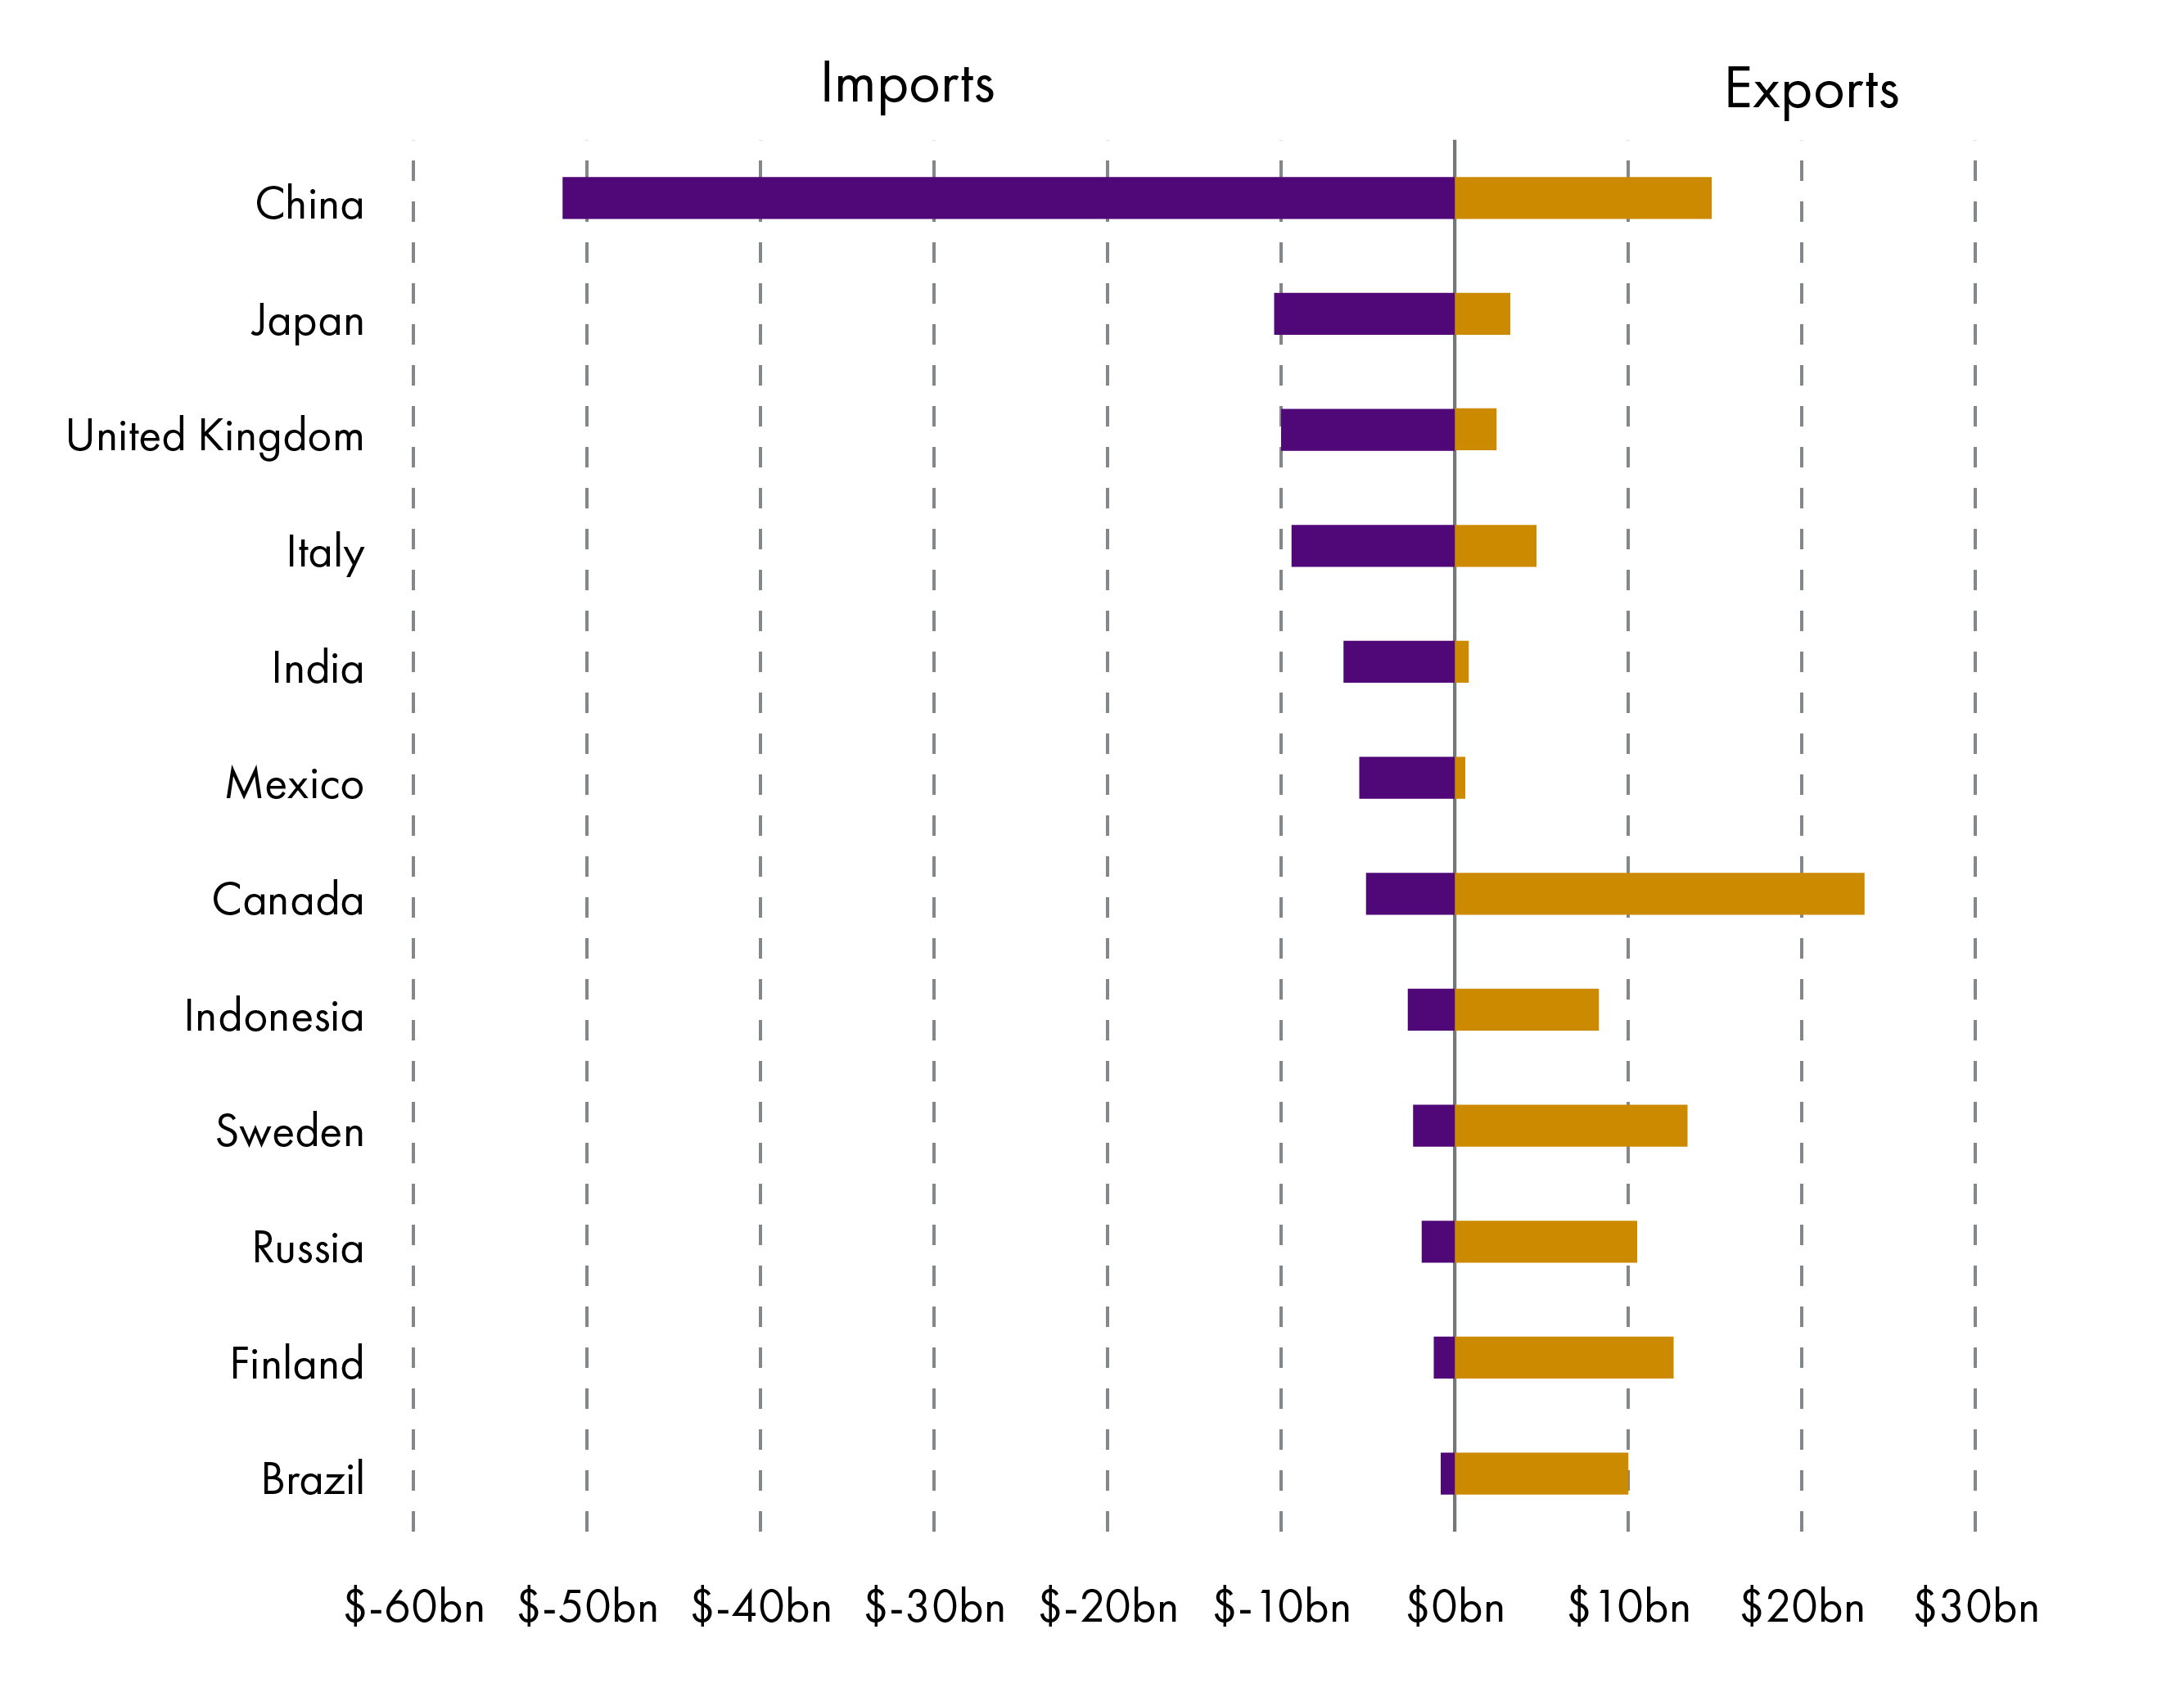 The UK is one of the biggest importers of wood in the world, after China and Japan